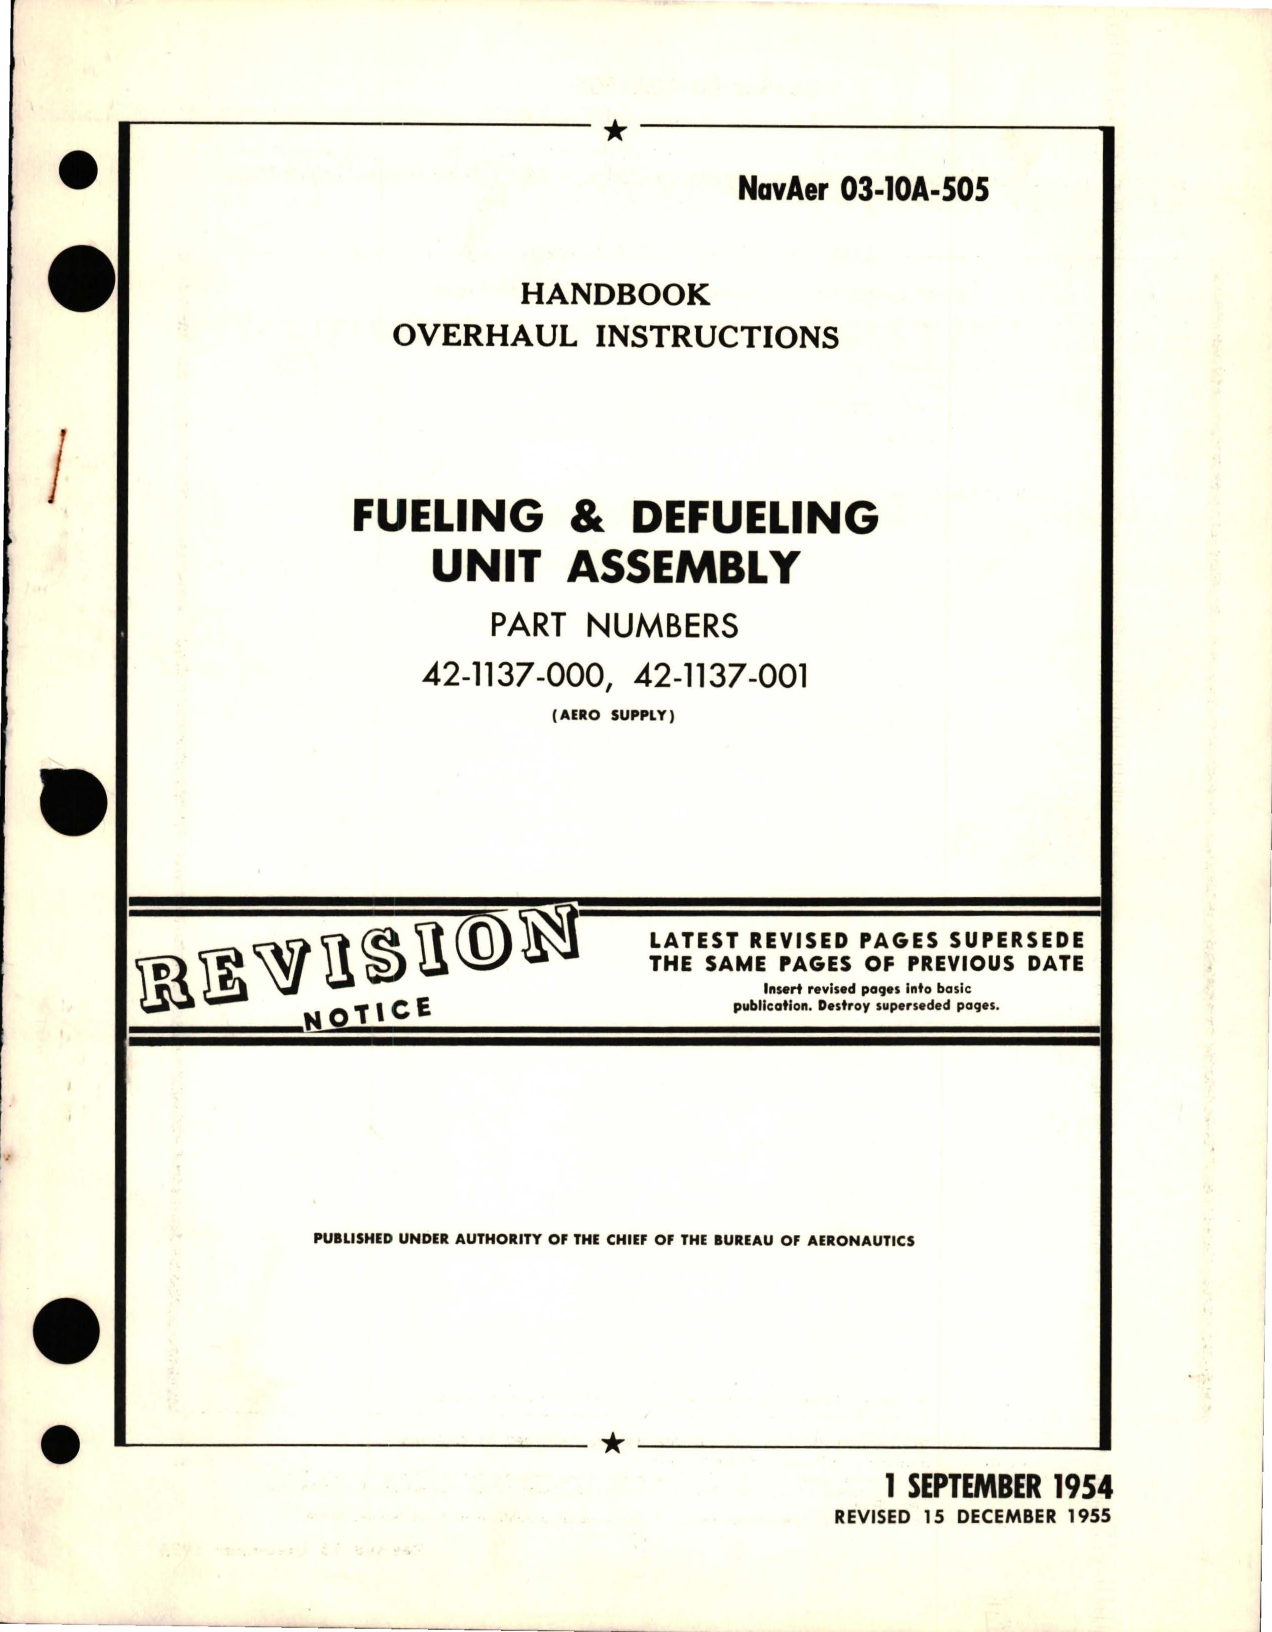 Sample page 1 from AirCorps Library document: Overhaul Instructions for Fueling and Defueling Unit Assembly - Parts 42-1137-000, 42-1137-001